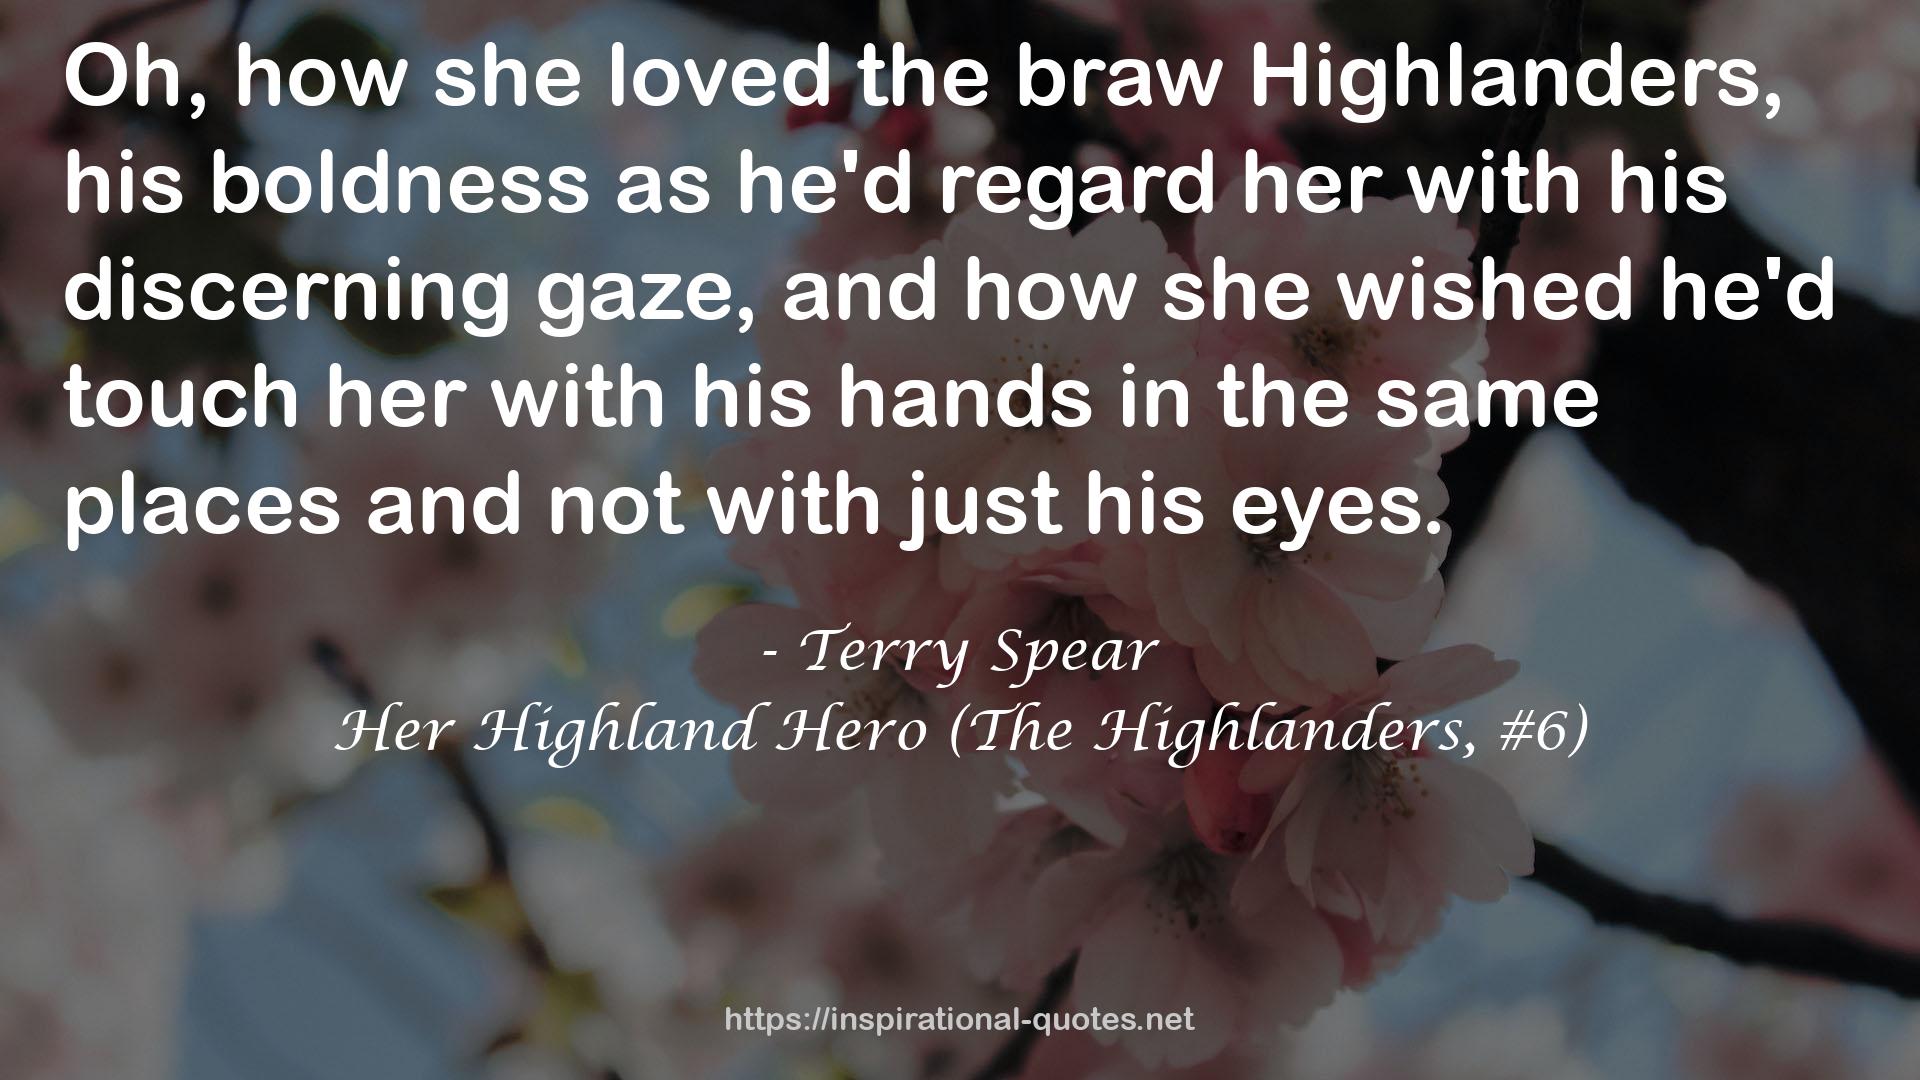 Her Highland Hero (The Highlanders, #6) QUOTES